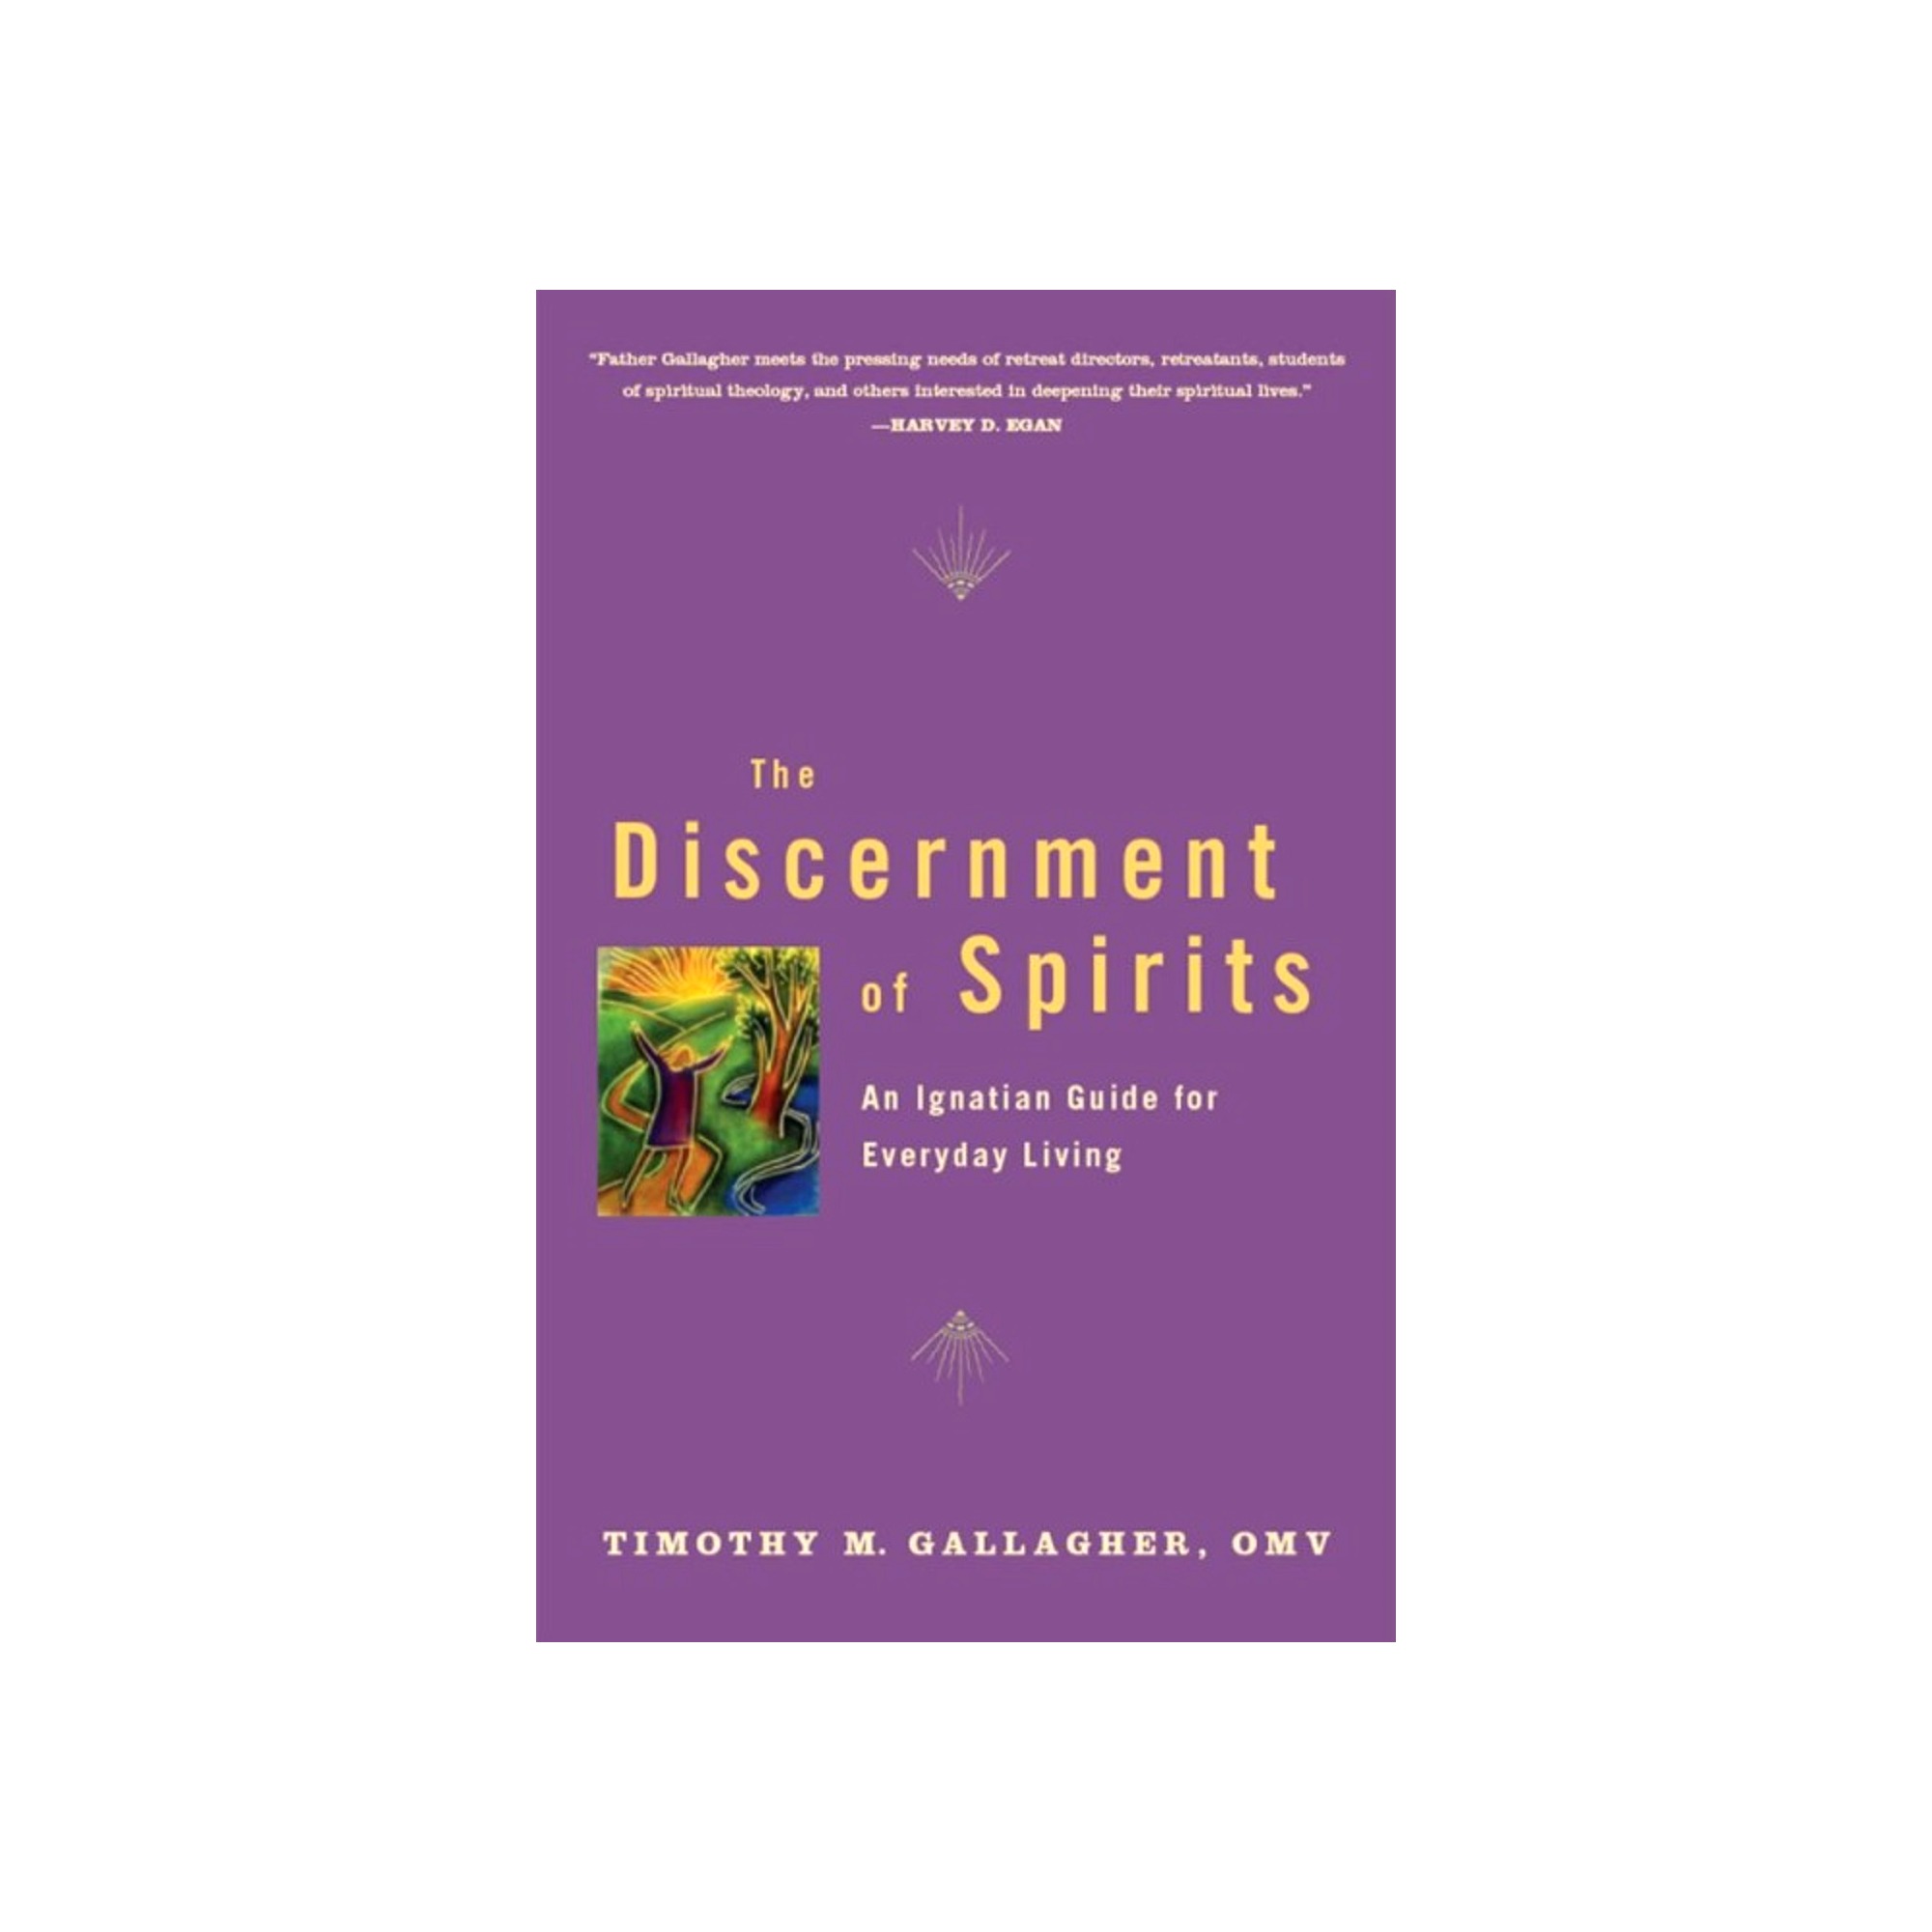 The Discernment of Spirits An Ignatian Guide for